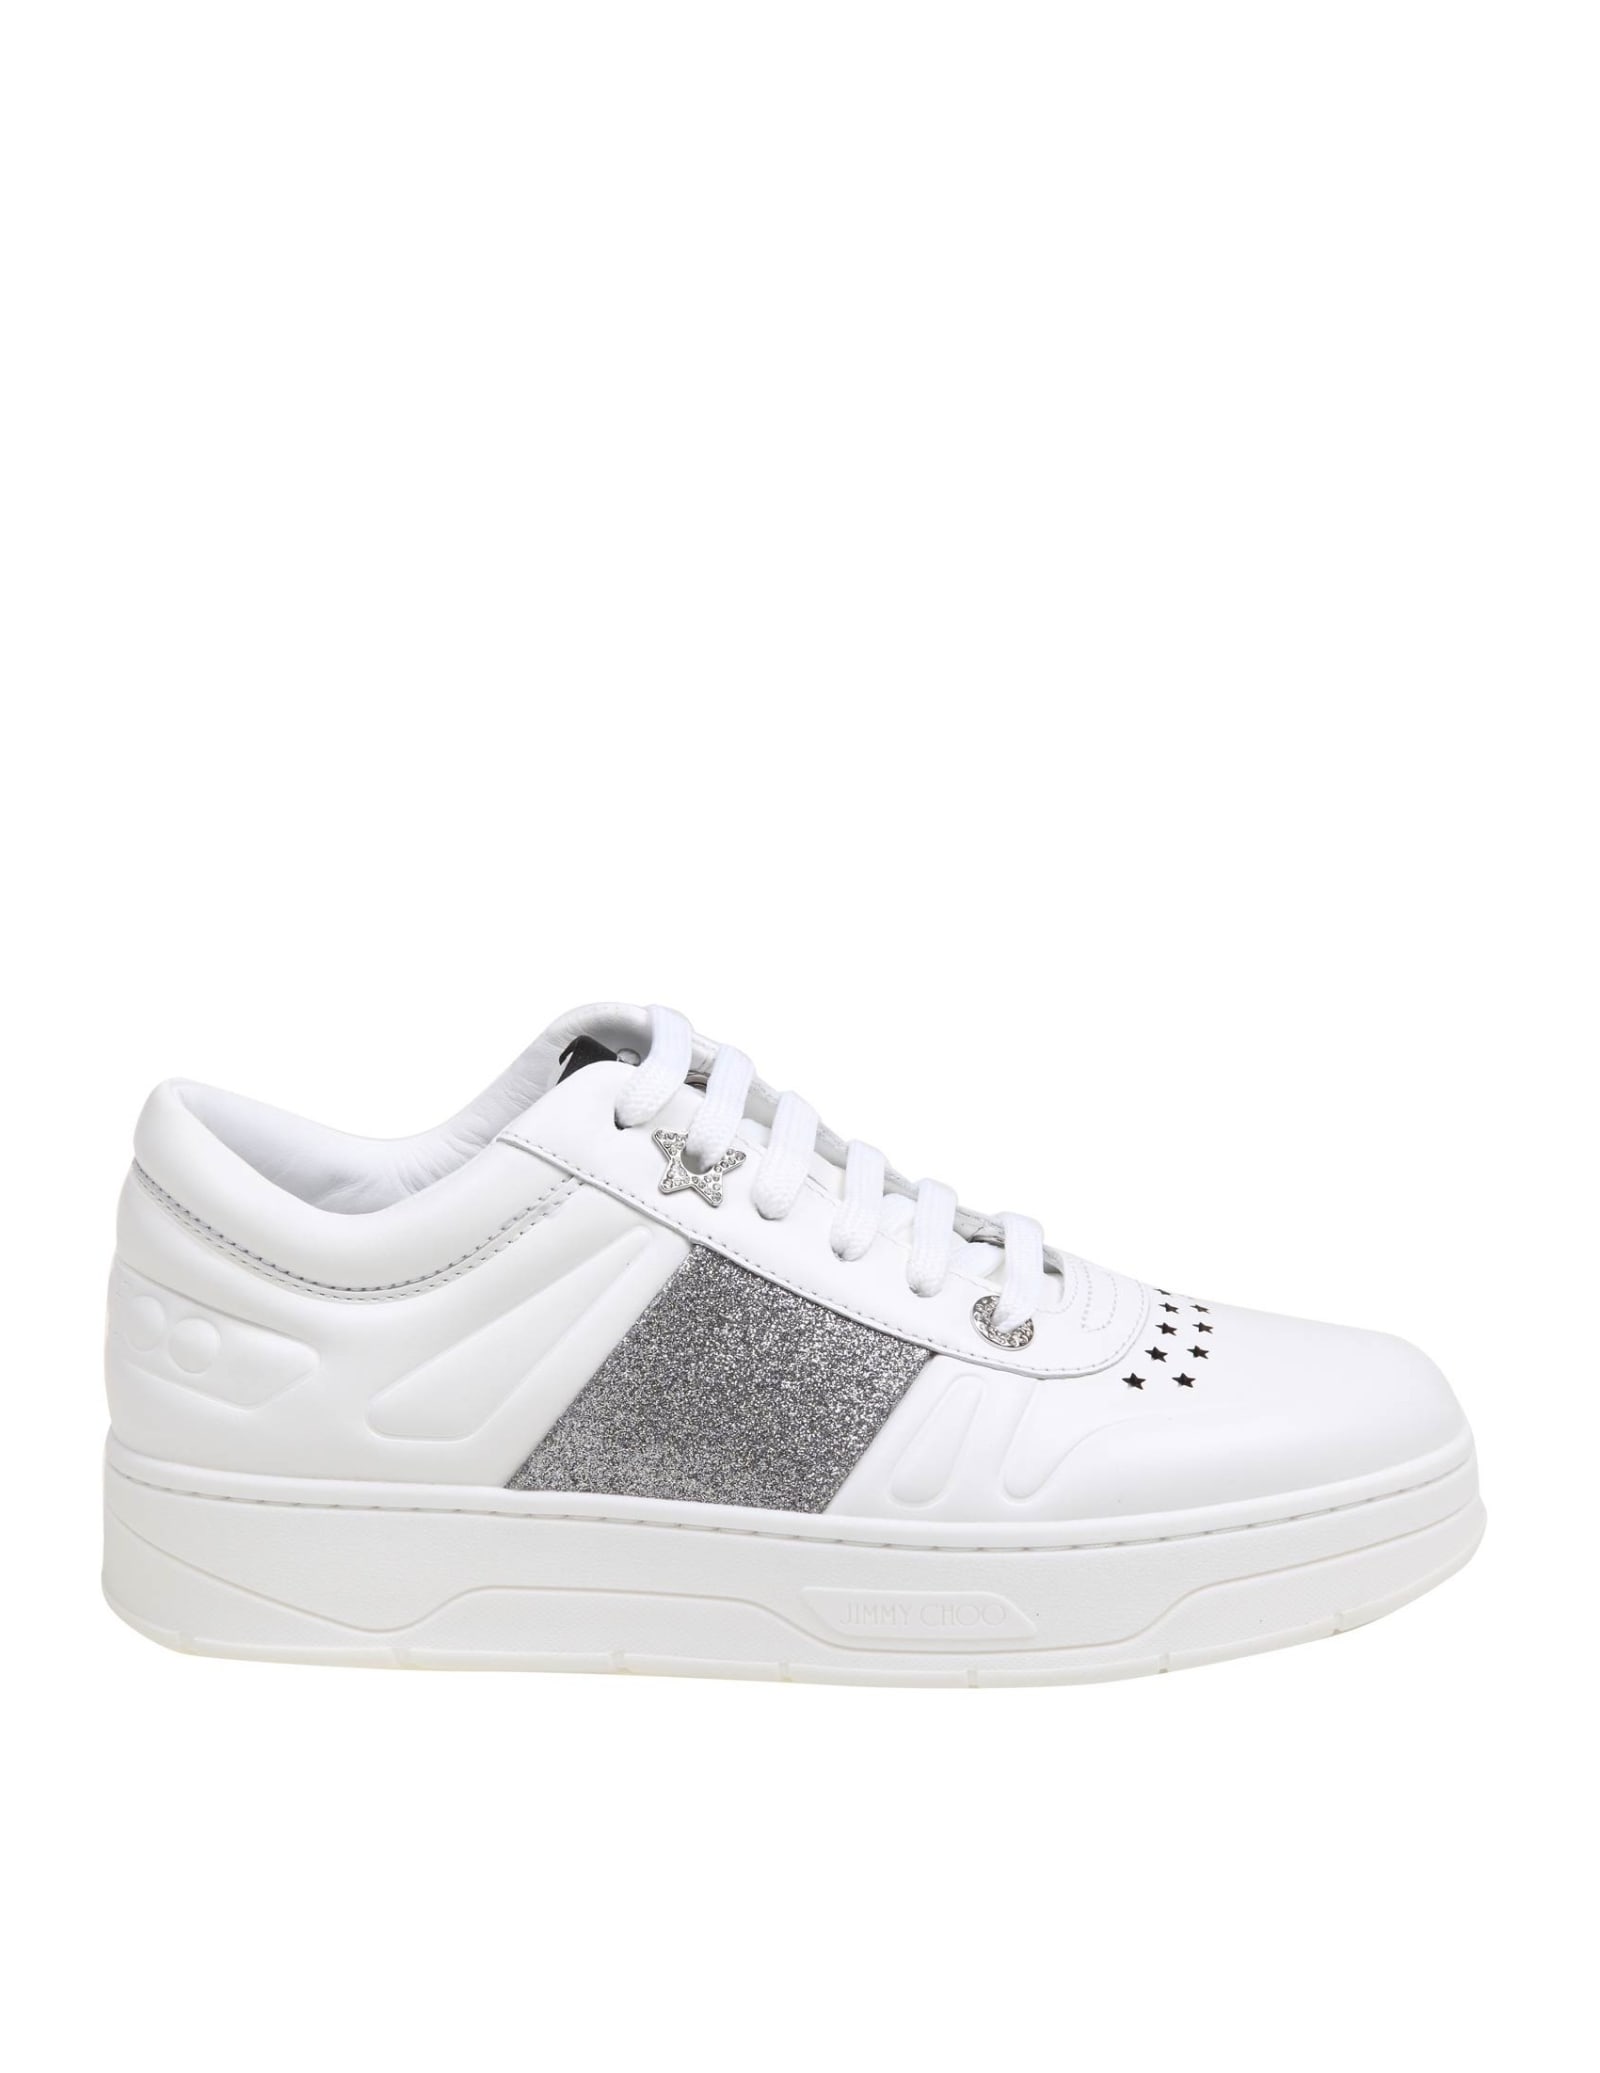 Buy Jimmy Choo Sneakers online, shop Jimmy Choo shoes with free shipping